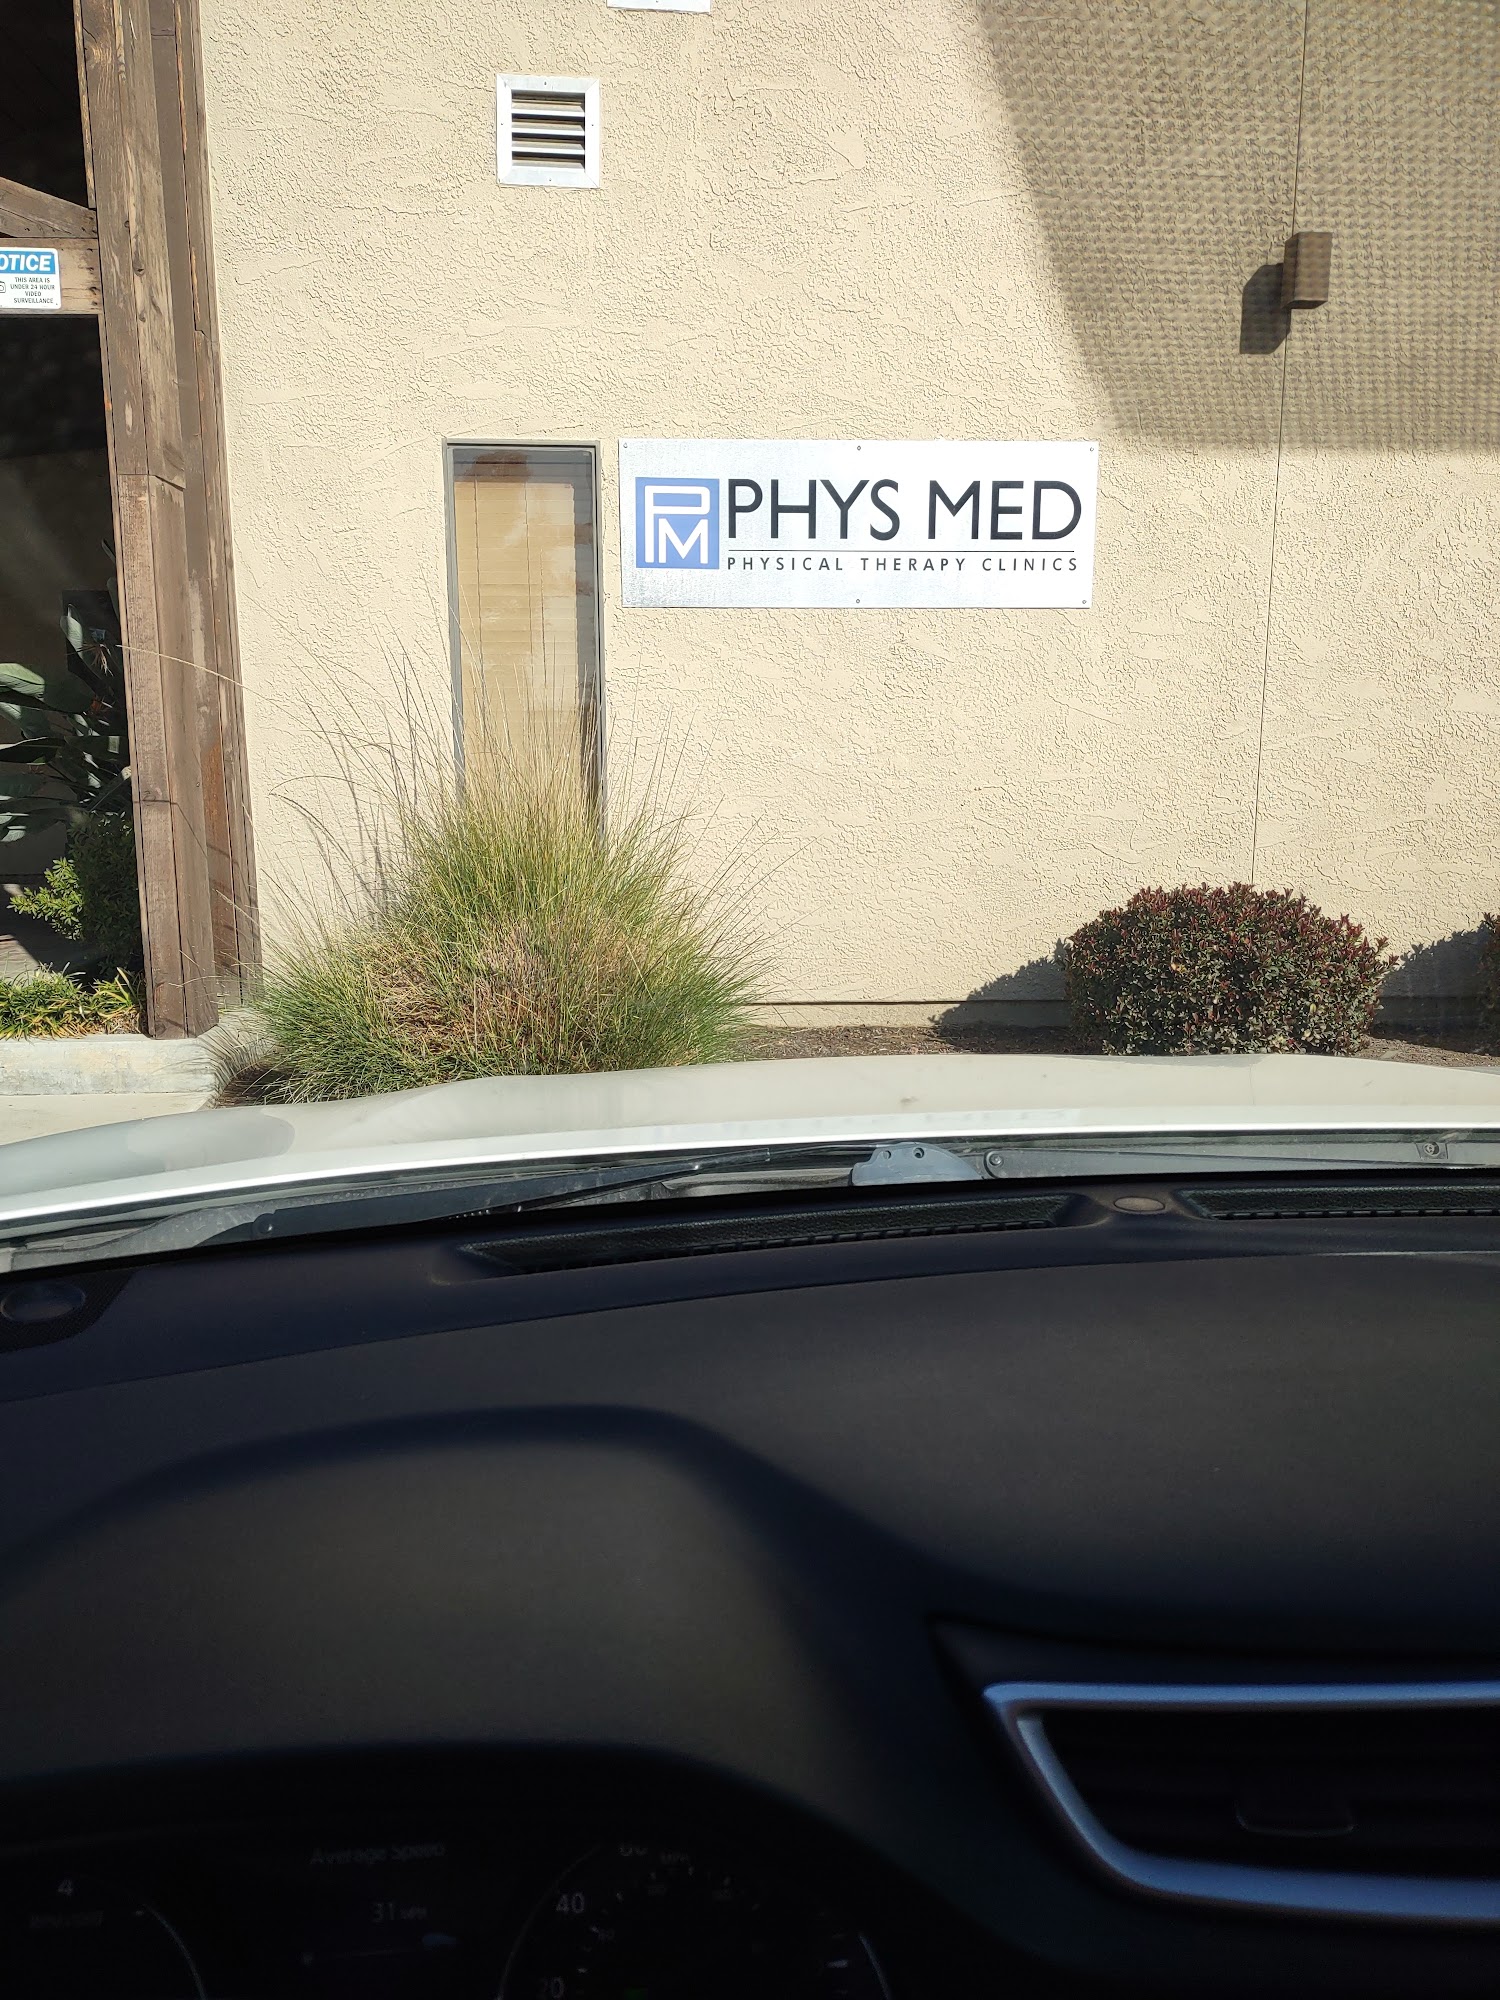 PhysMed - Physical Therapy 650 S Zediker Ave Bldg. 2, Parlier California 93648